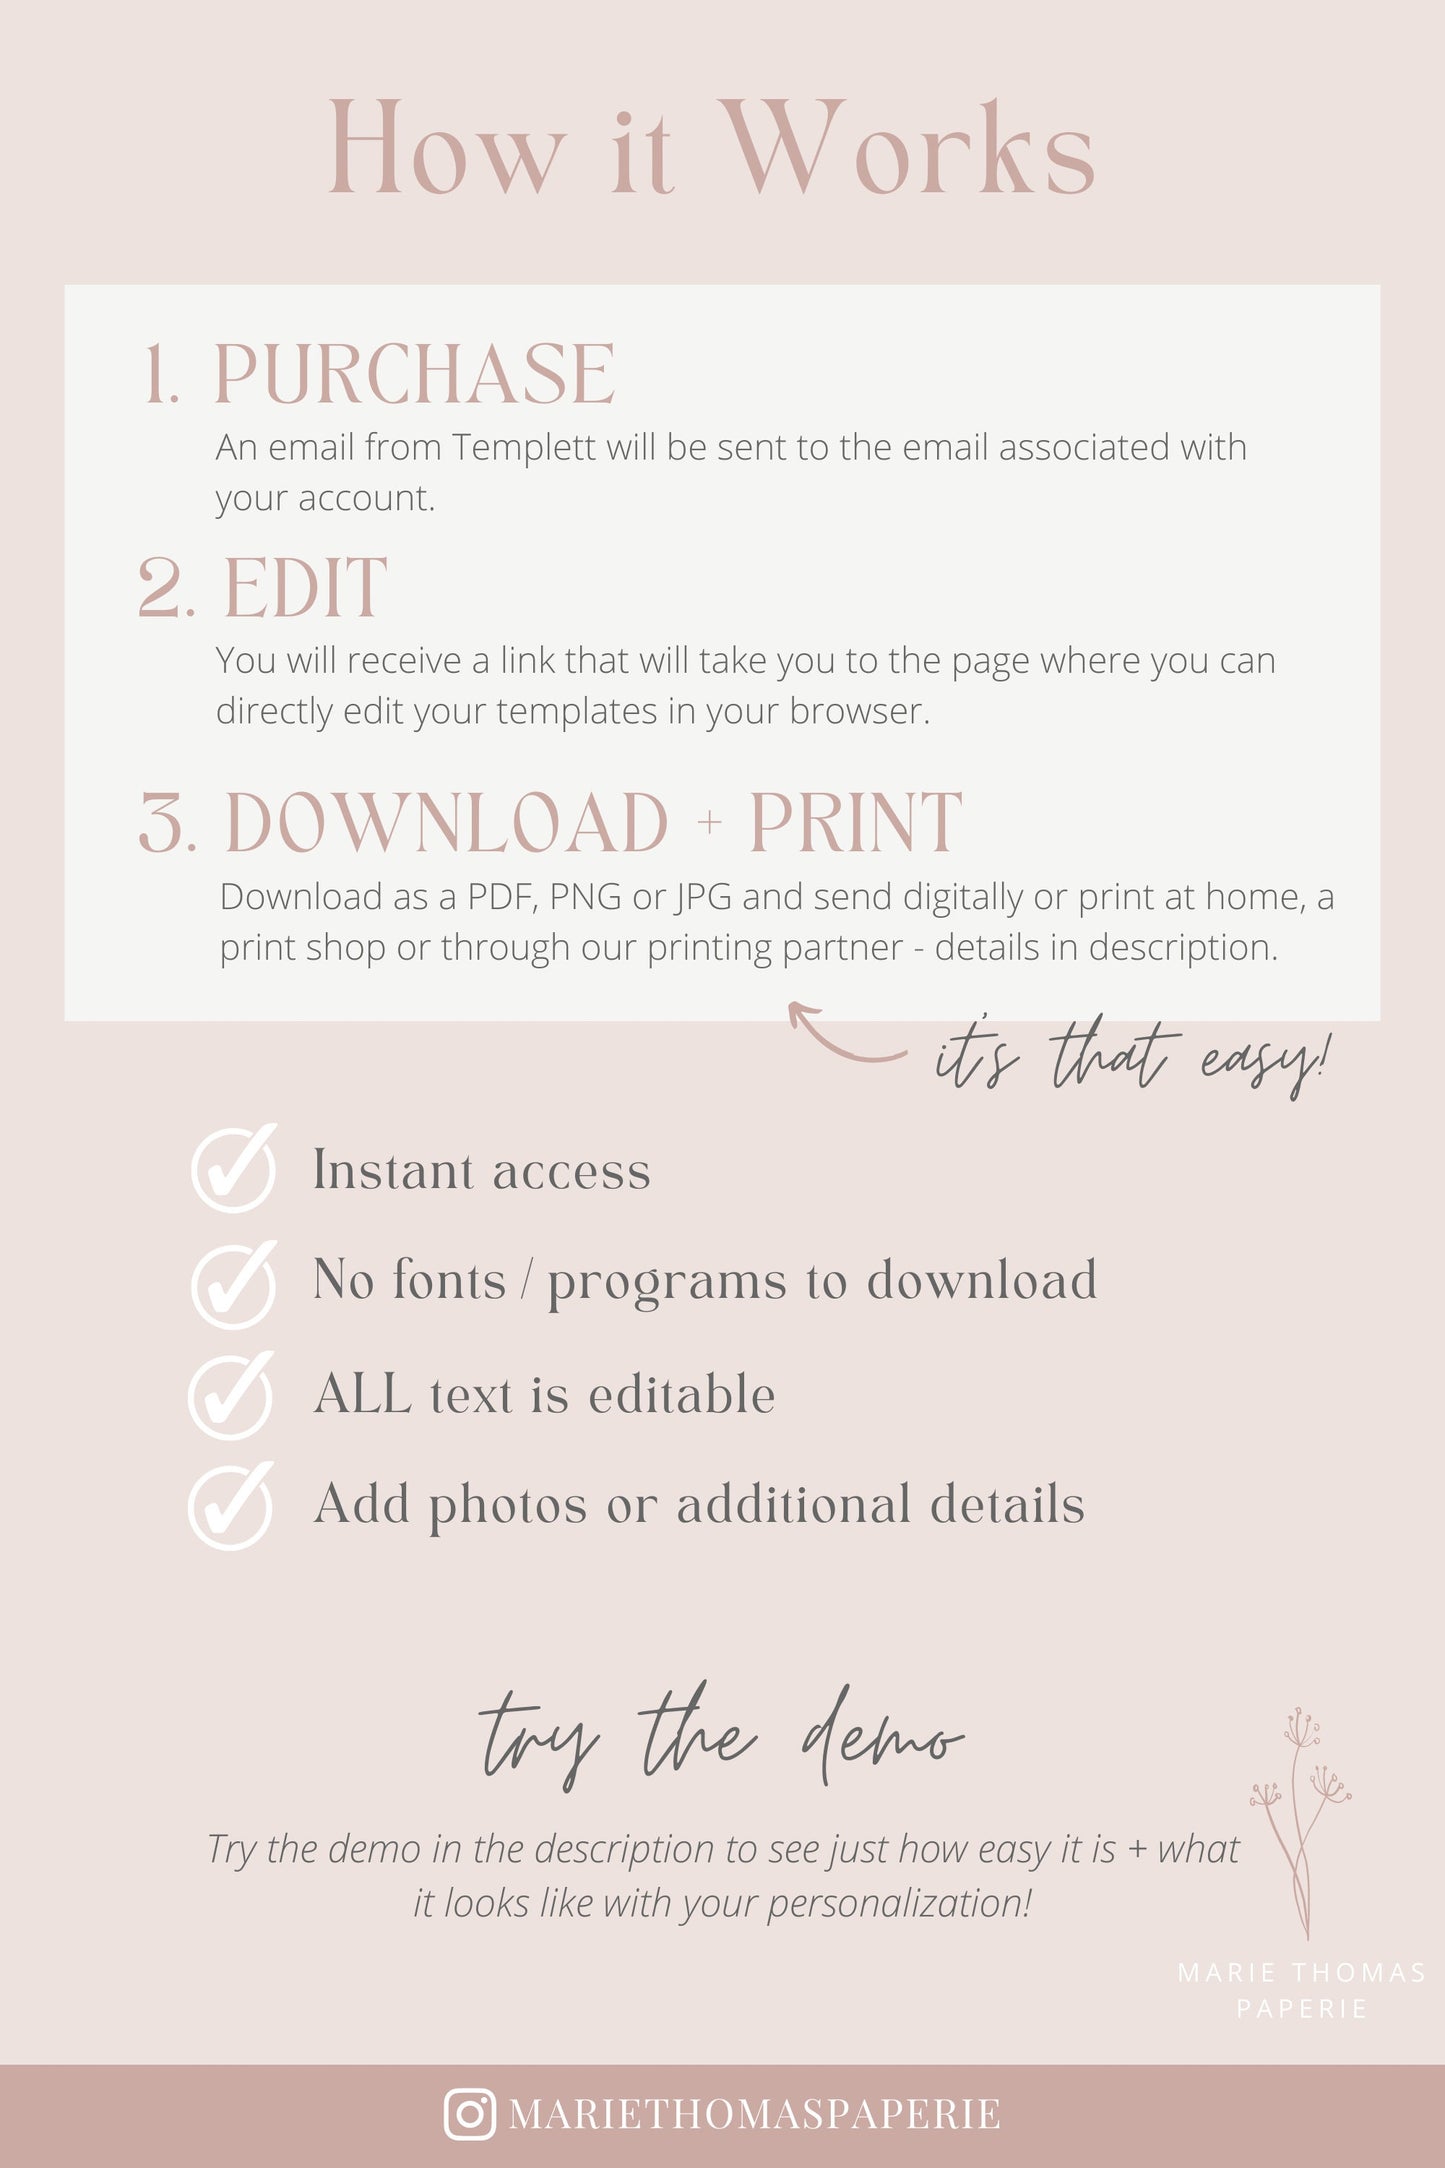 Editable Does the Bride Really Know the Groom Bridal Shower Games Bridal Game Blush Pink Template